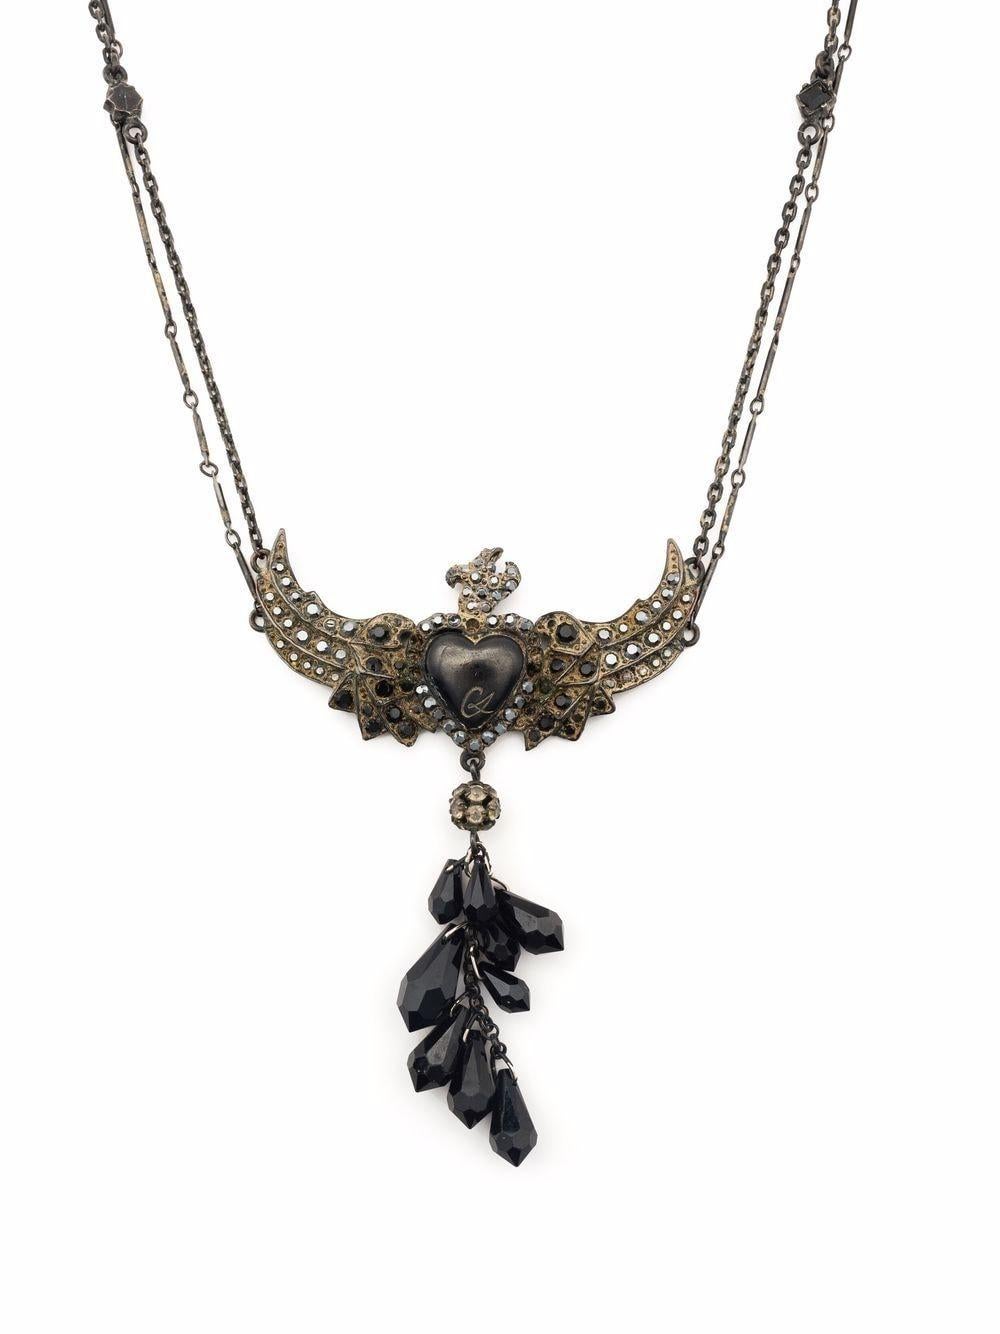 1980s Christian Lacroix heart bird necklace featuring black/bronze-tone stone, bead detailing, heart motif, cable-link chain, lobster claw fastening, adjustable-length chain.
Length open  14.6 in. (37cm)
Pendant Legth: 3.7 in (9.7cm)
In good vintage